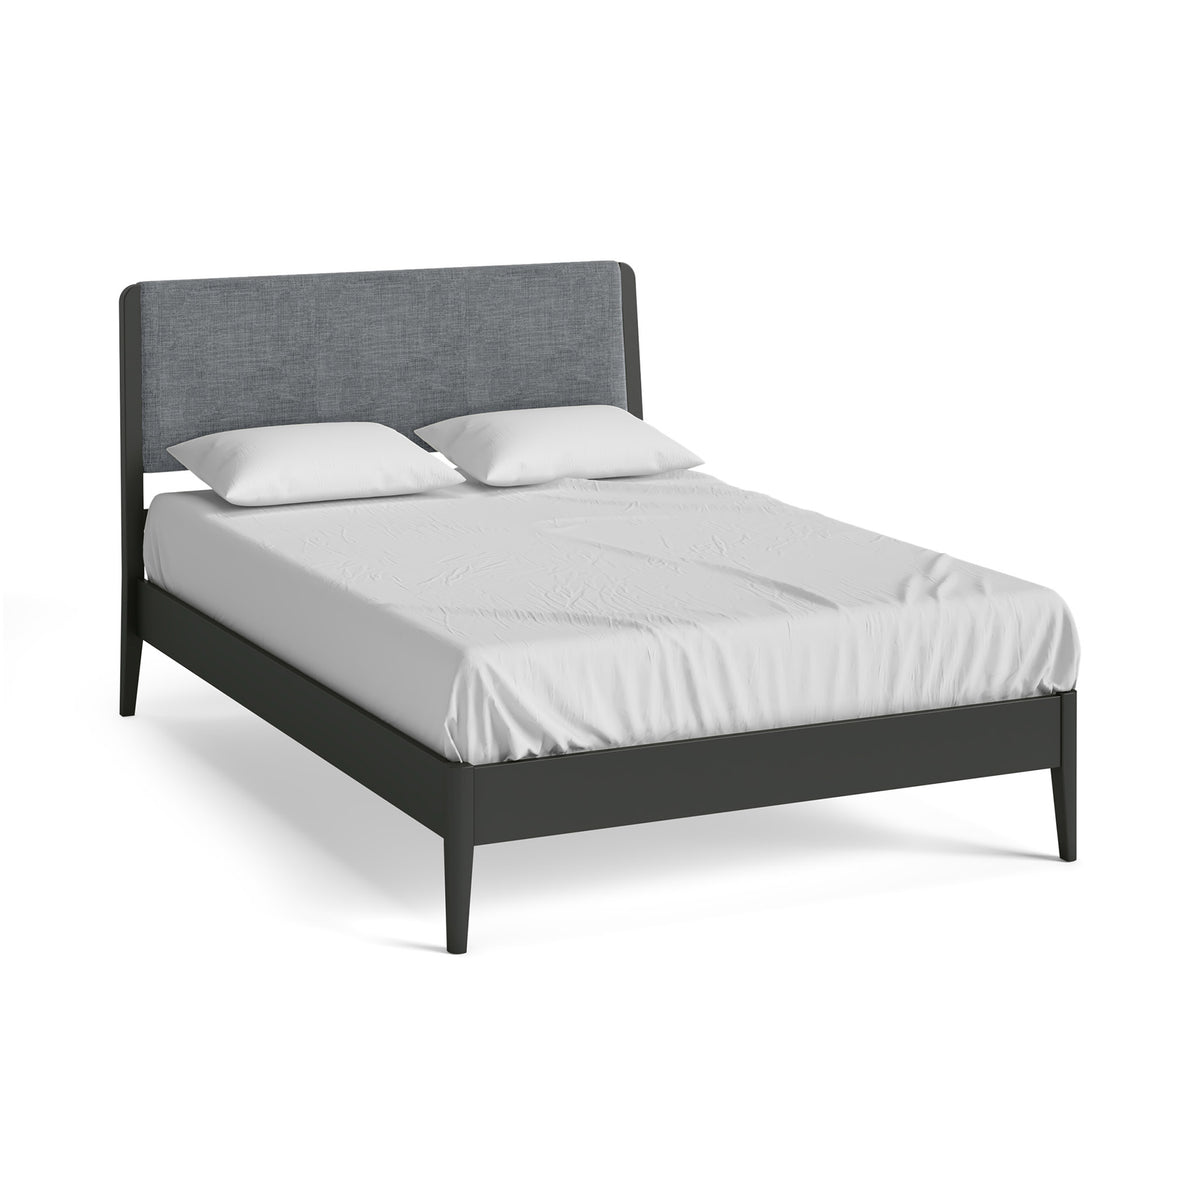 Dumbarton Charcoal Grey 4ft6 Double Bed Frame from Roseland Furniture